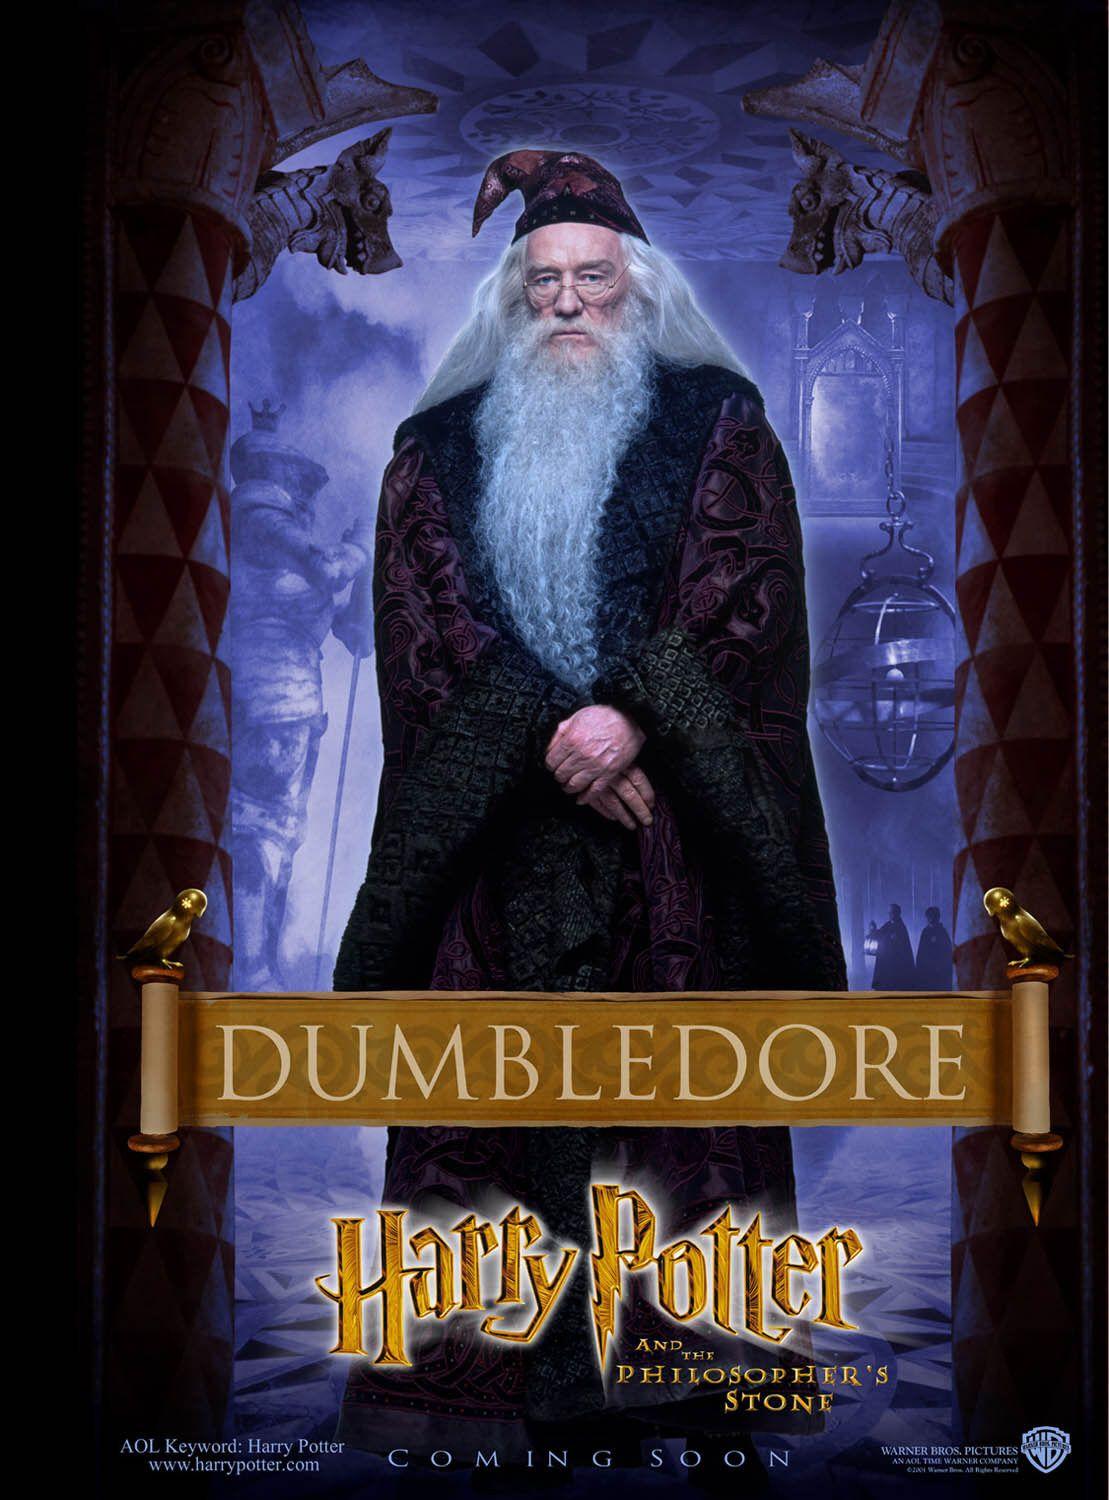 Albus Dumbledore screenshots, image and picture